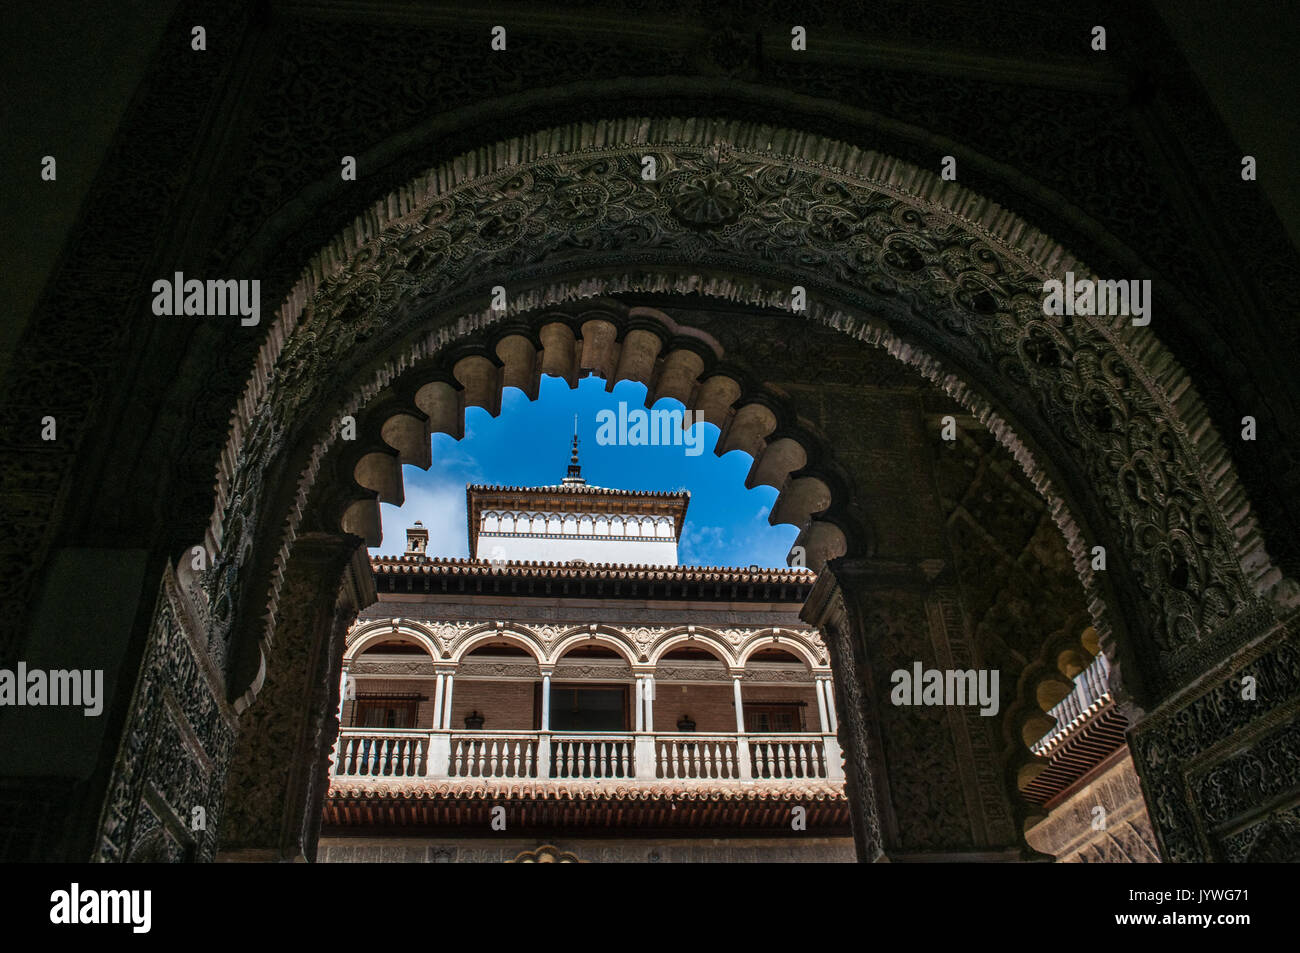 Spain: the Patio de las Doncellas, theCourtyard of the Maidens of the King Peter I Palace, seen from an horseshoe arch in the royal Alcazar of Seville Stock Photo